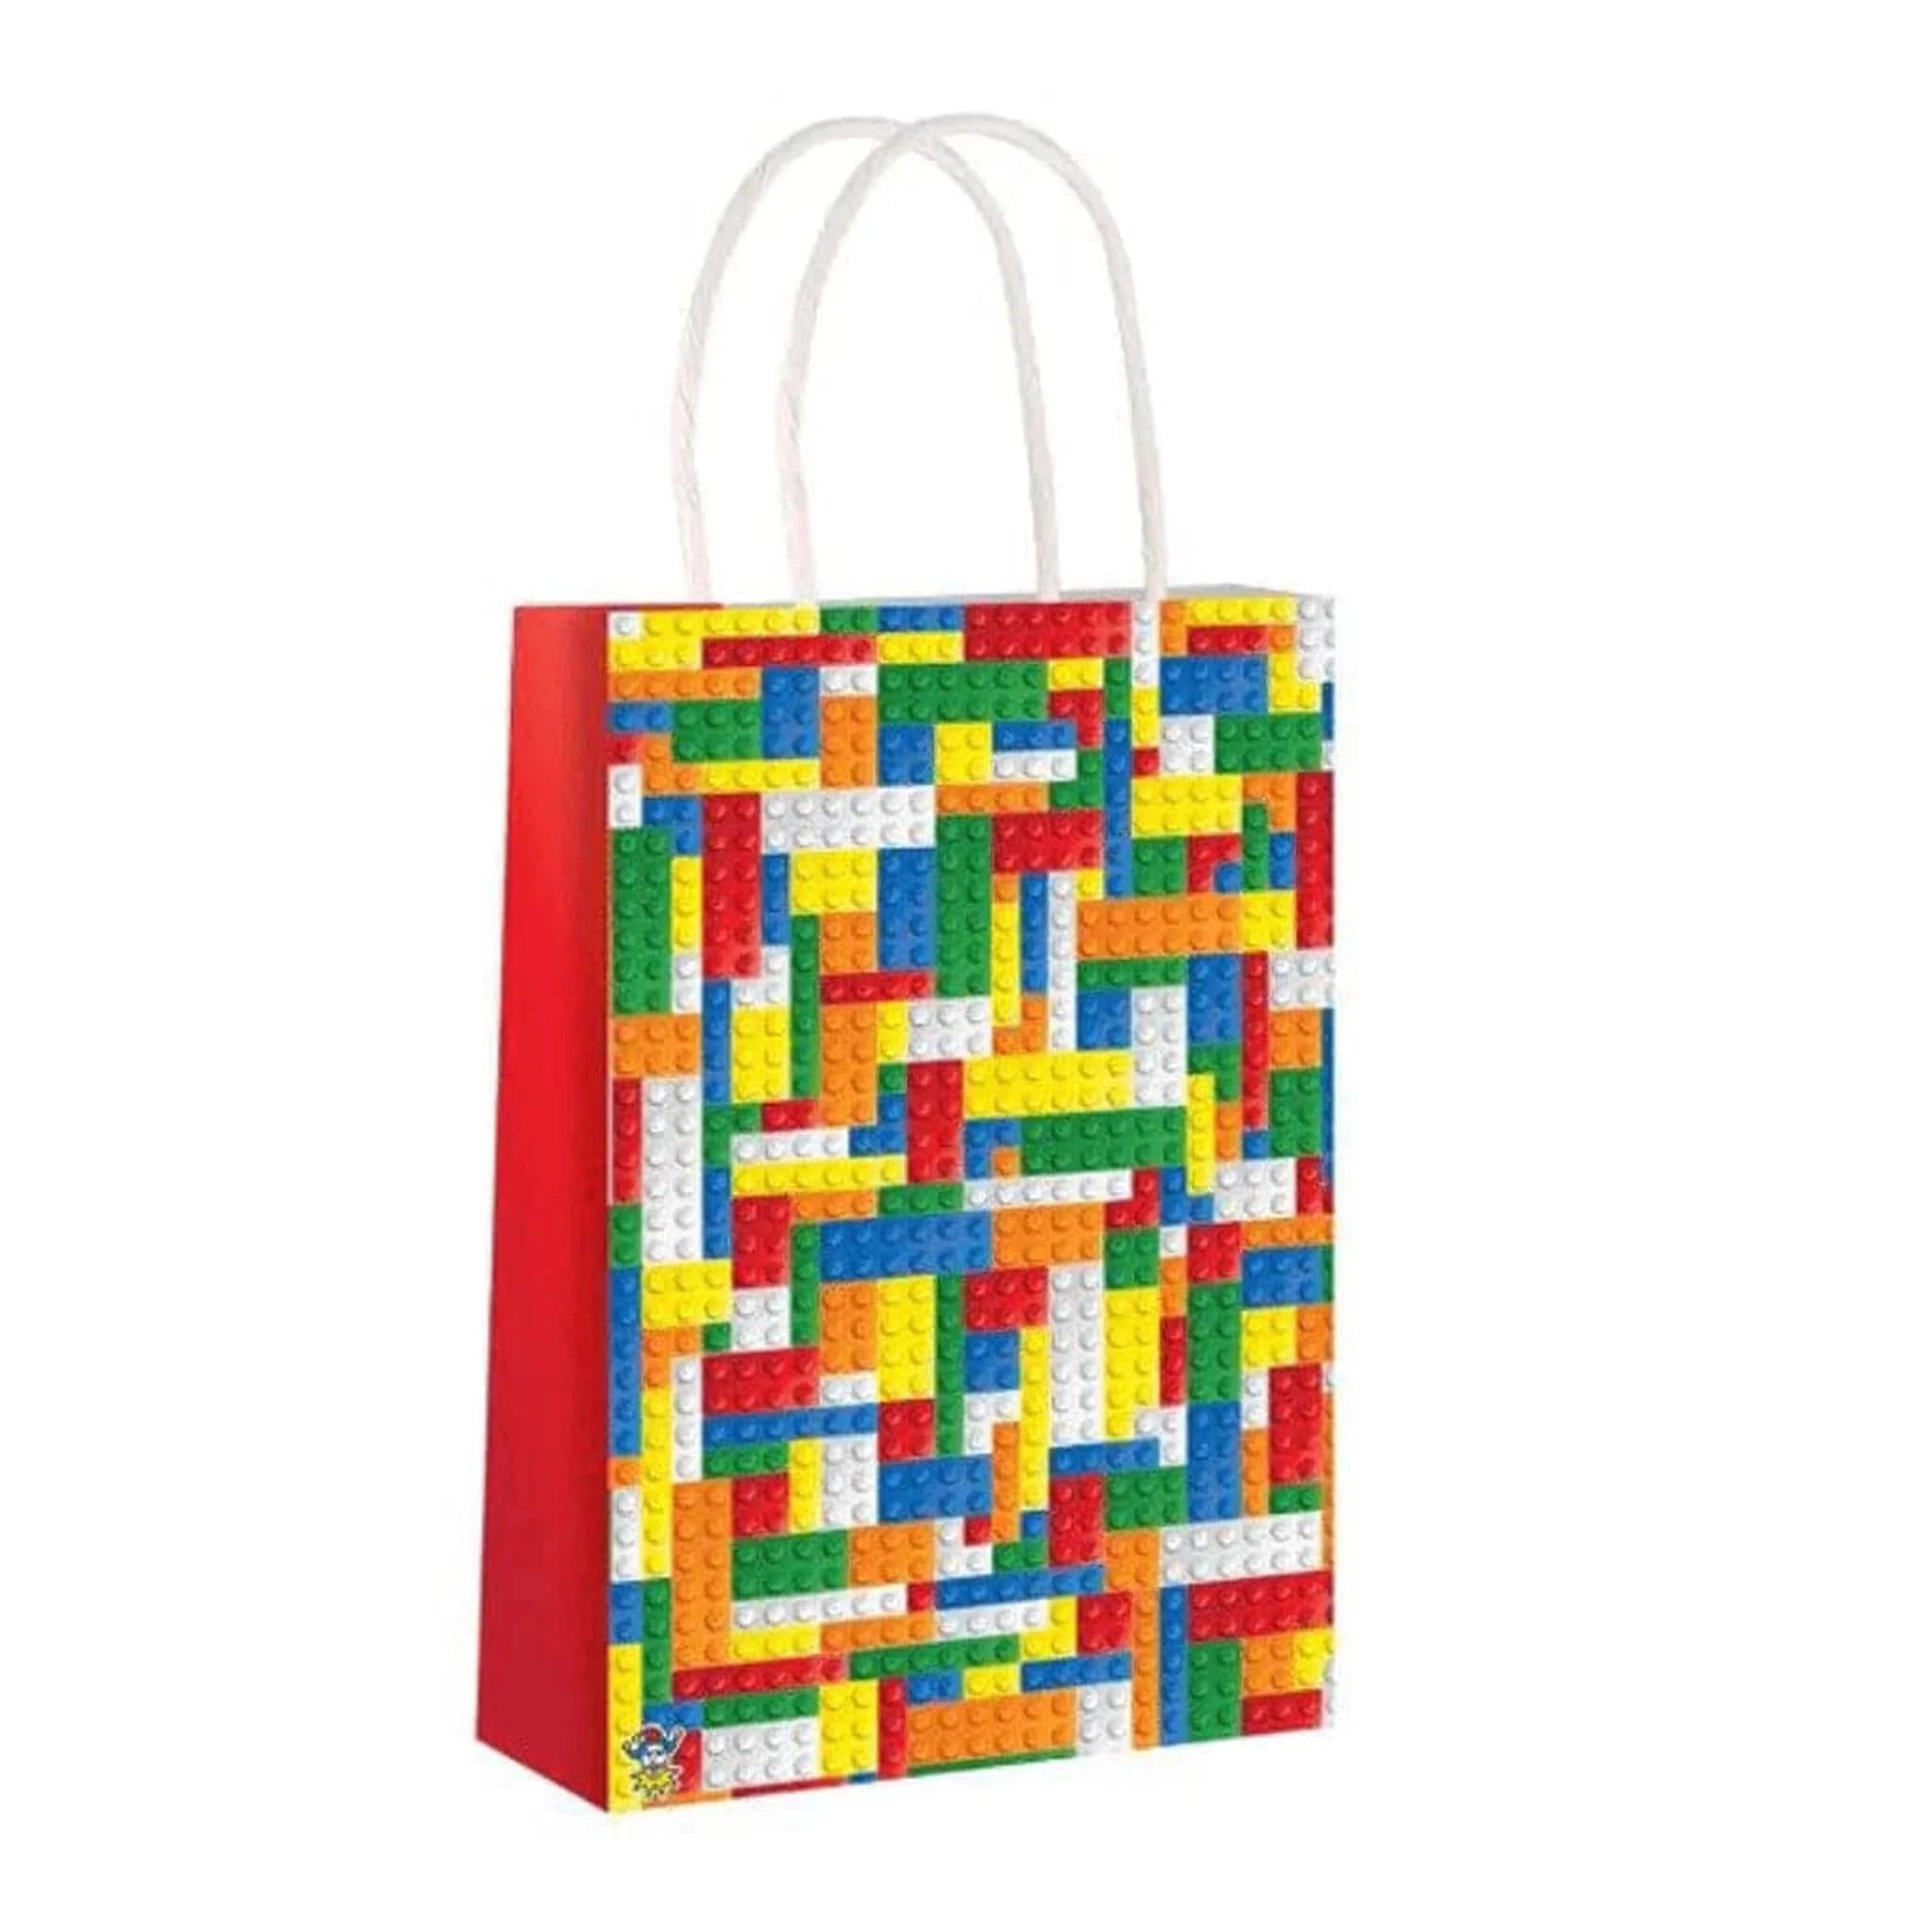 Brickz Party Bags - Kids Party Craft